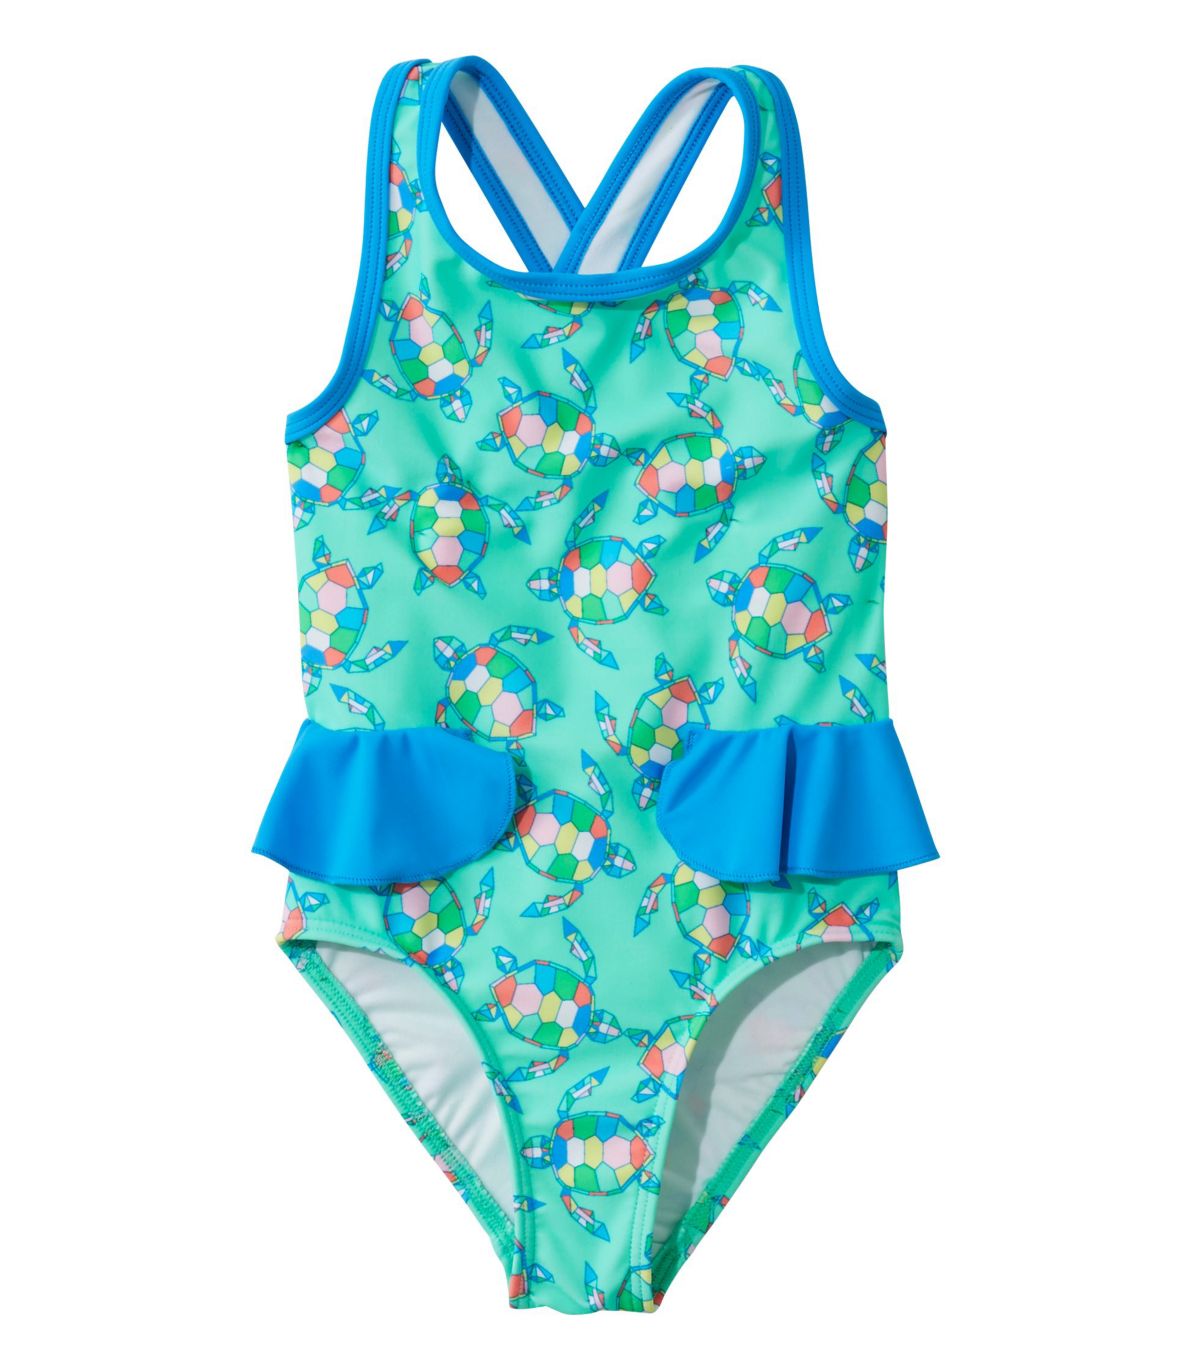 Toddler Girls' Tide Surfer Swimsuit, One-Piece